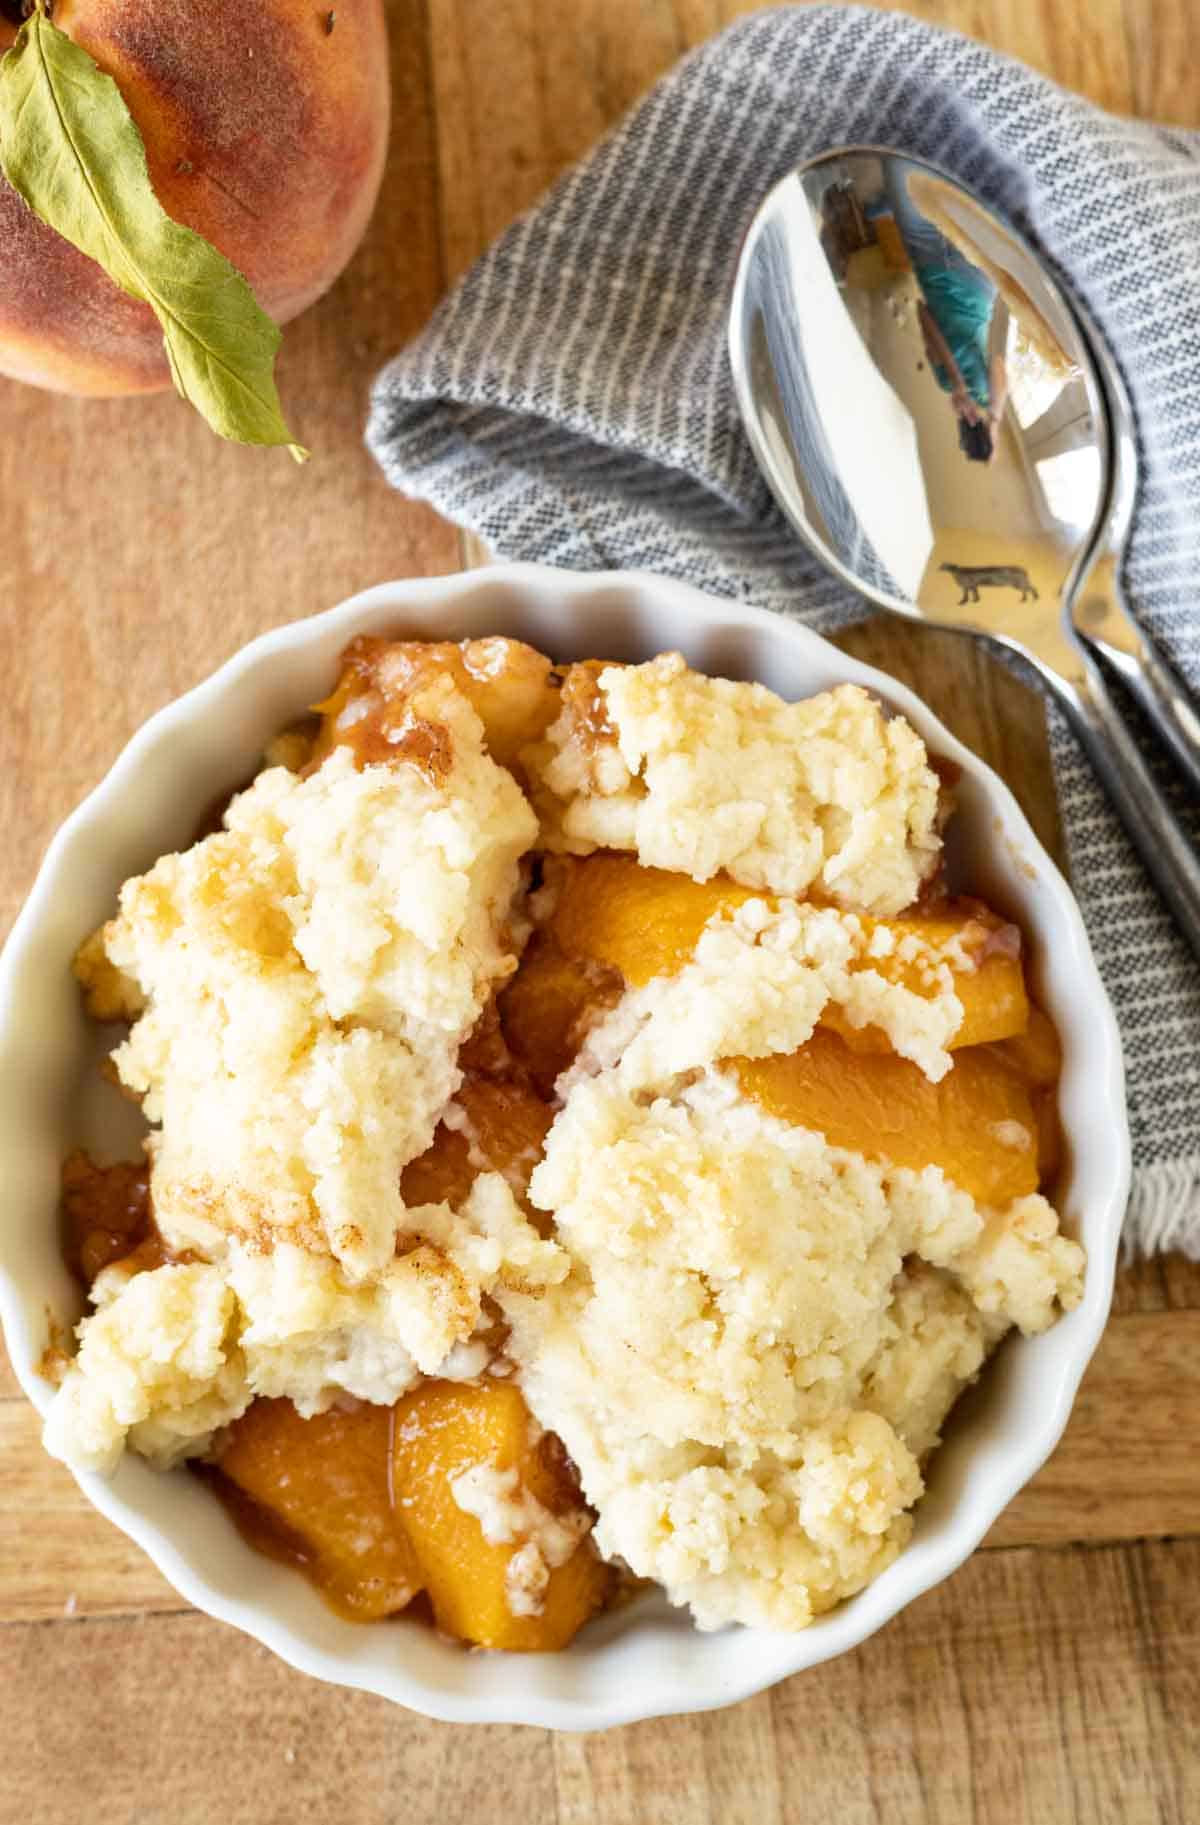 A peach cobbler topped with crust in a white dish.